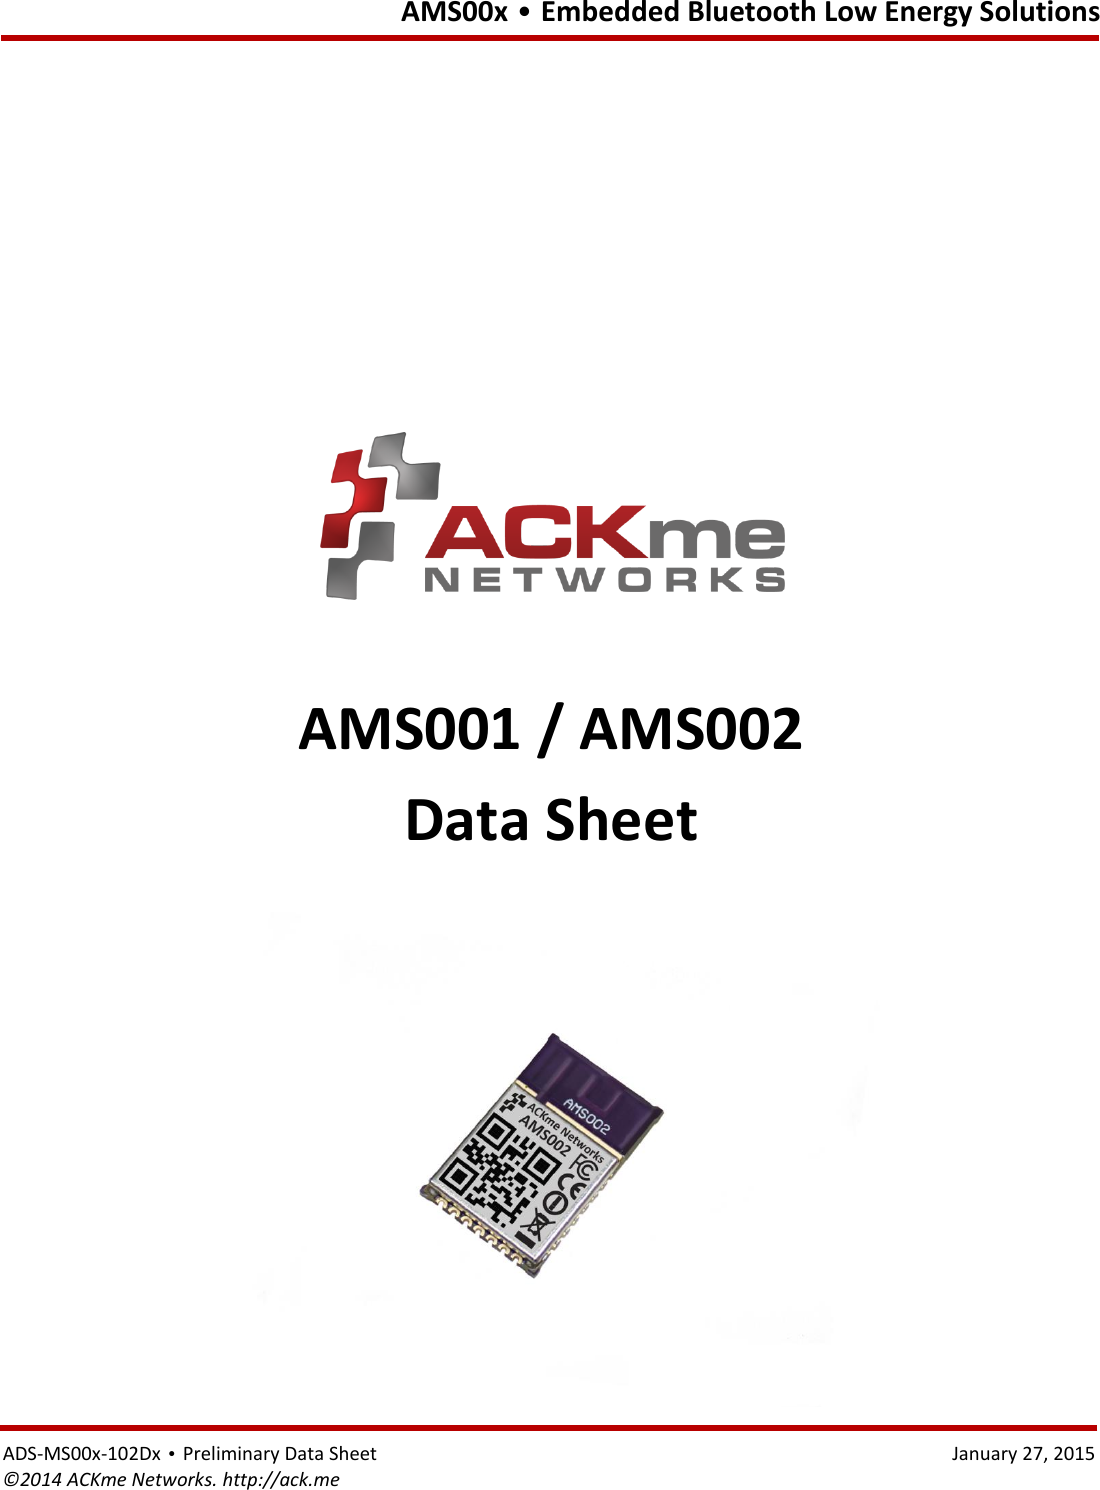   AMS00x • Embedded Bluetooth Low Energy Solutions ADS-MS00x-102Dx • Preliminary Data Sheet    January 27, 2015 ©2014 ACKme Networks. http://ack.me                   AMS001 / AMS002 Data Sheet  